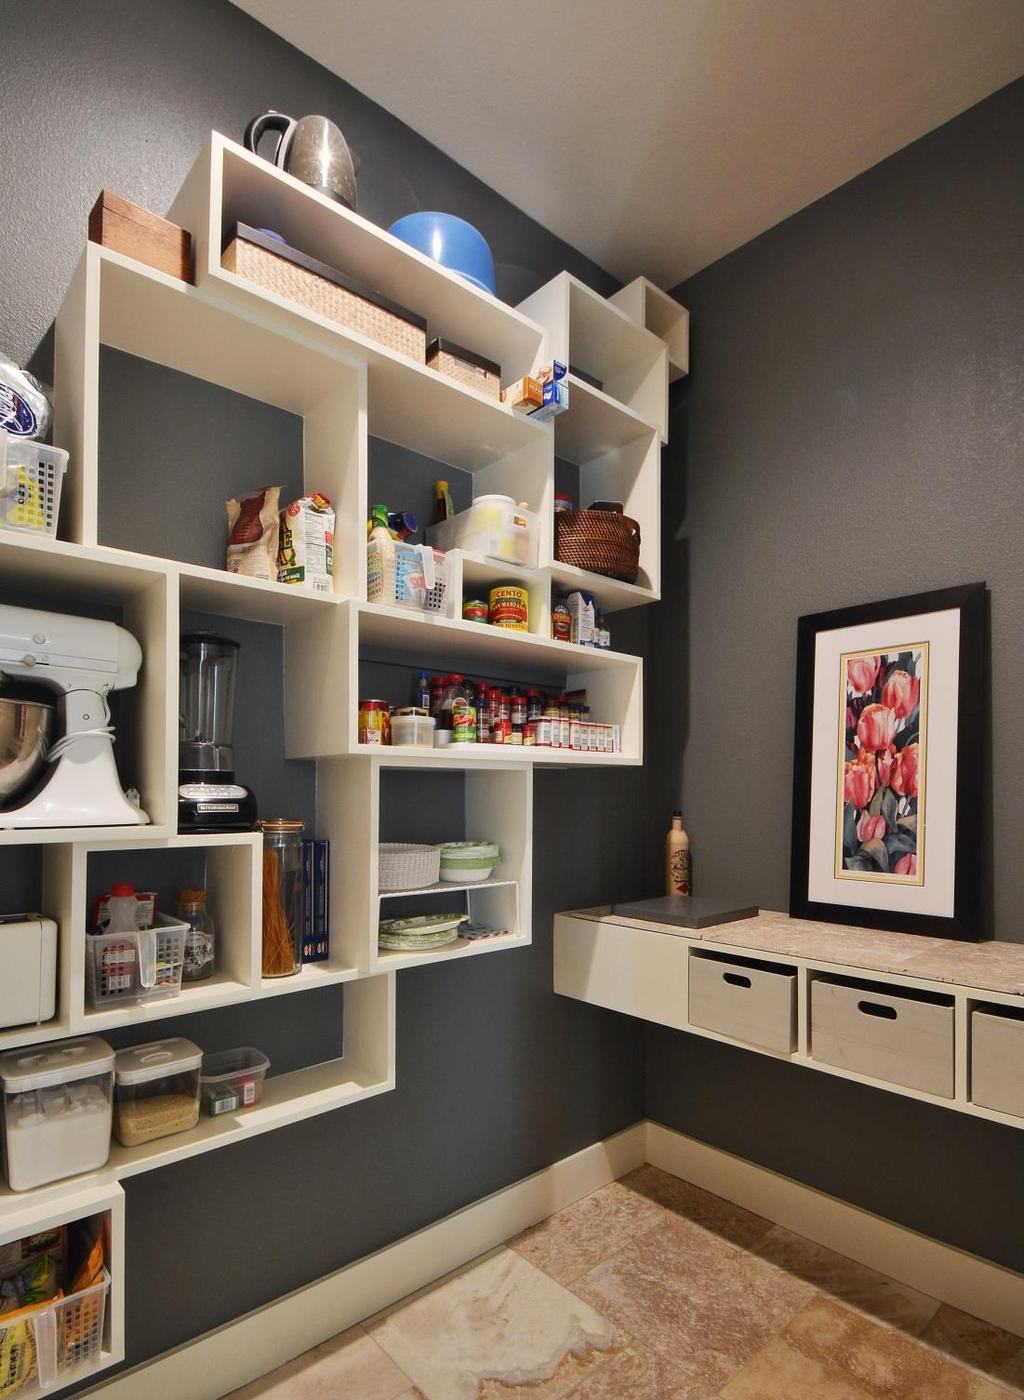 Unique pantry design offers multiple storage options. Cubbies of varying heights, widths and DEPTHS were specifically measured and built to hold common pantry items.